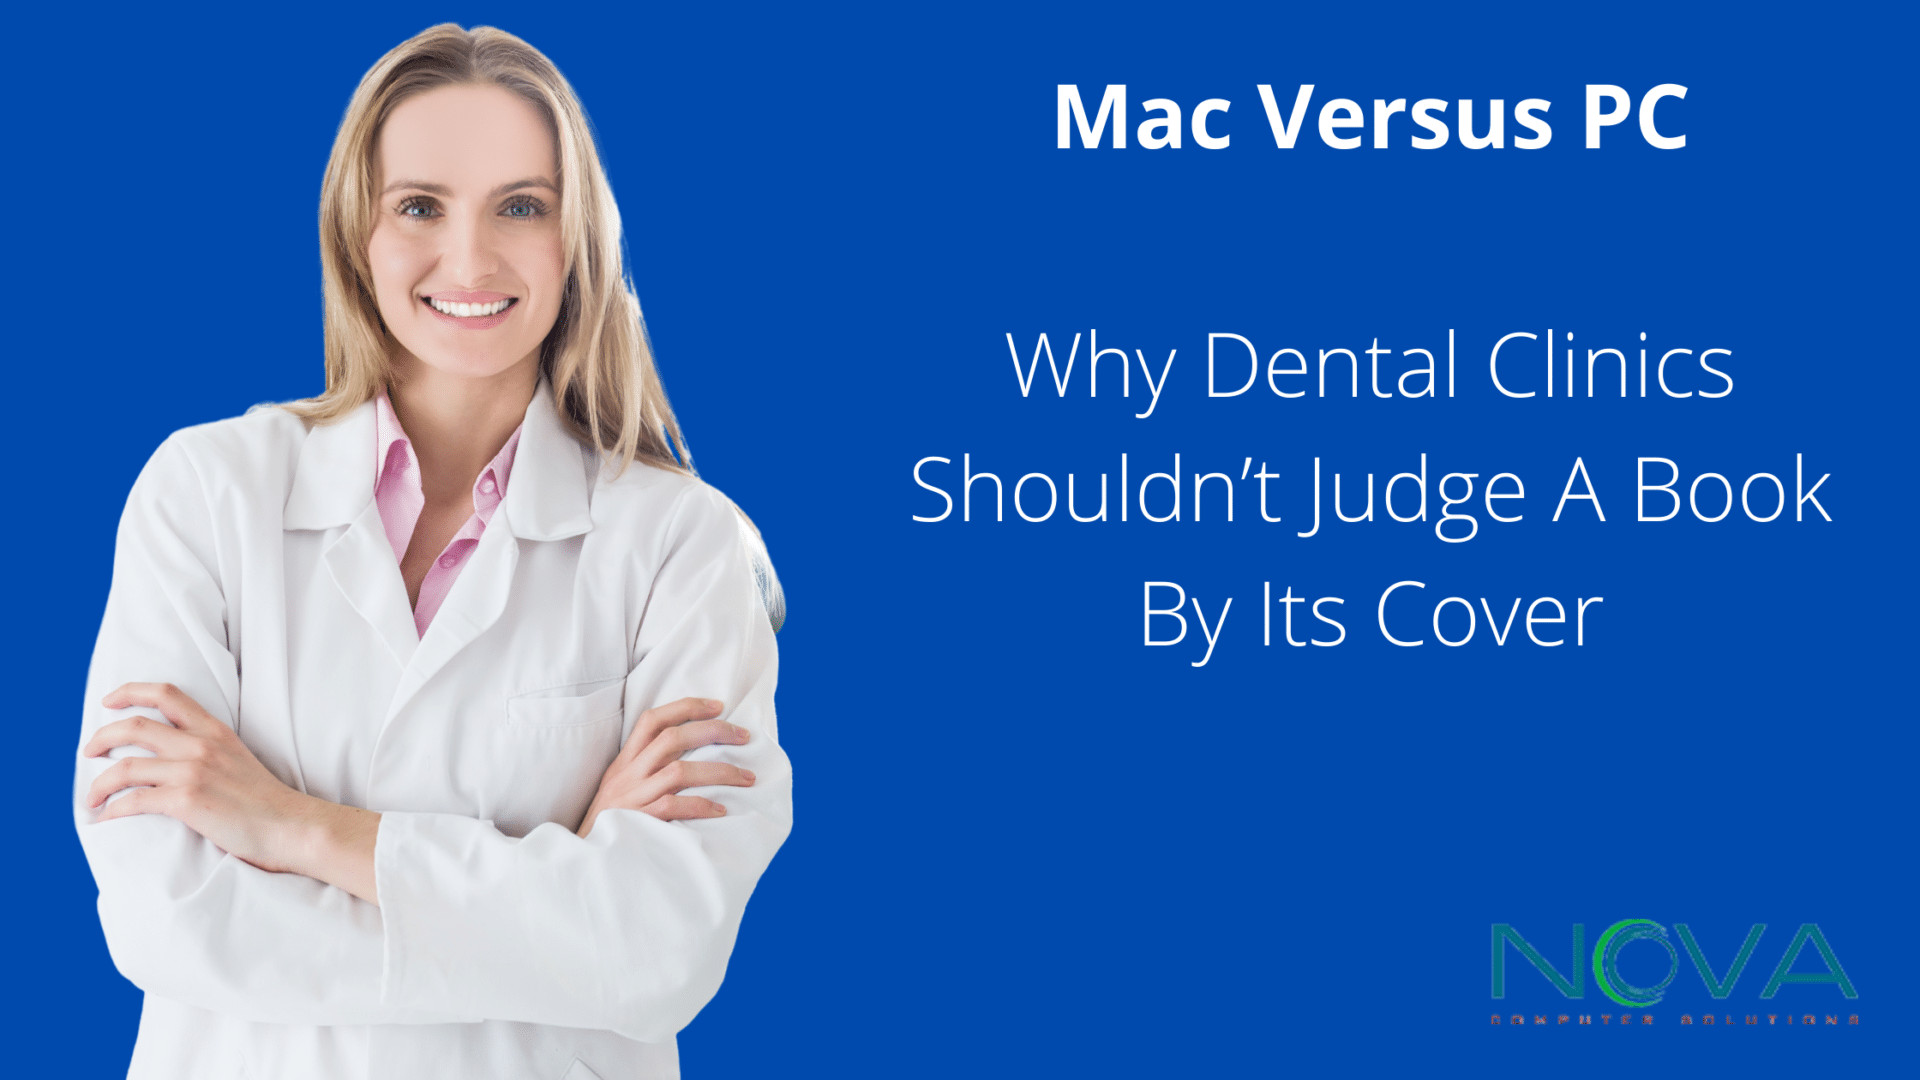 Mac Versus PC_ Why Dental Clinics Shouldn’t Judge A Book By Its Cover